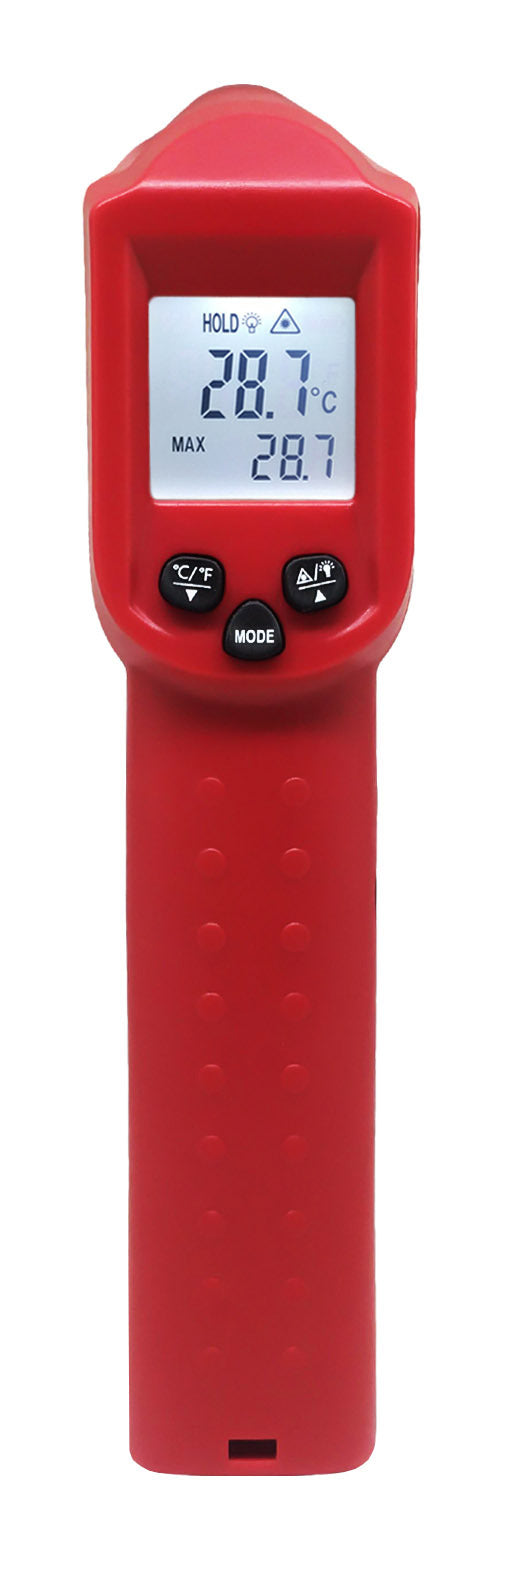 Fireup Infrared Thermometer